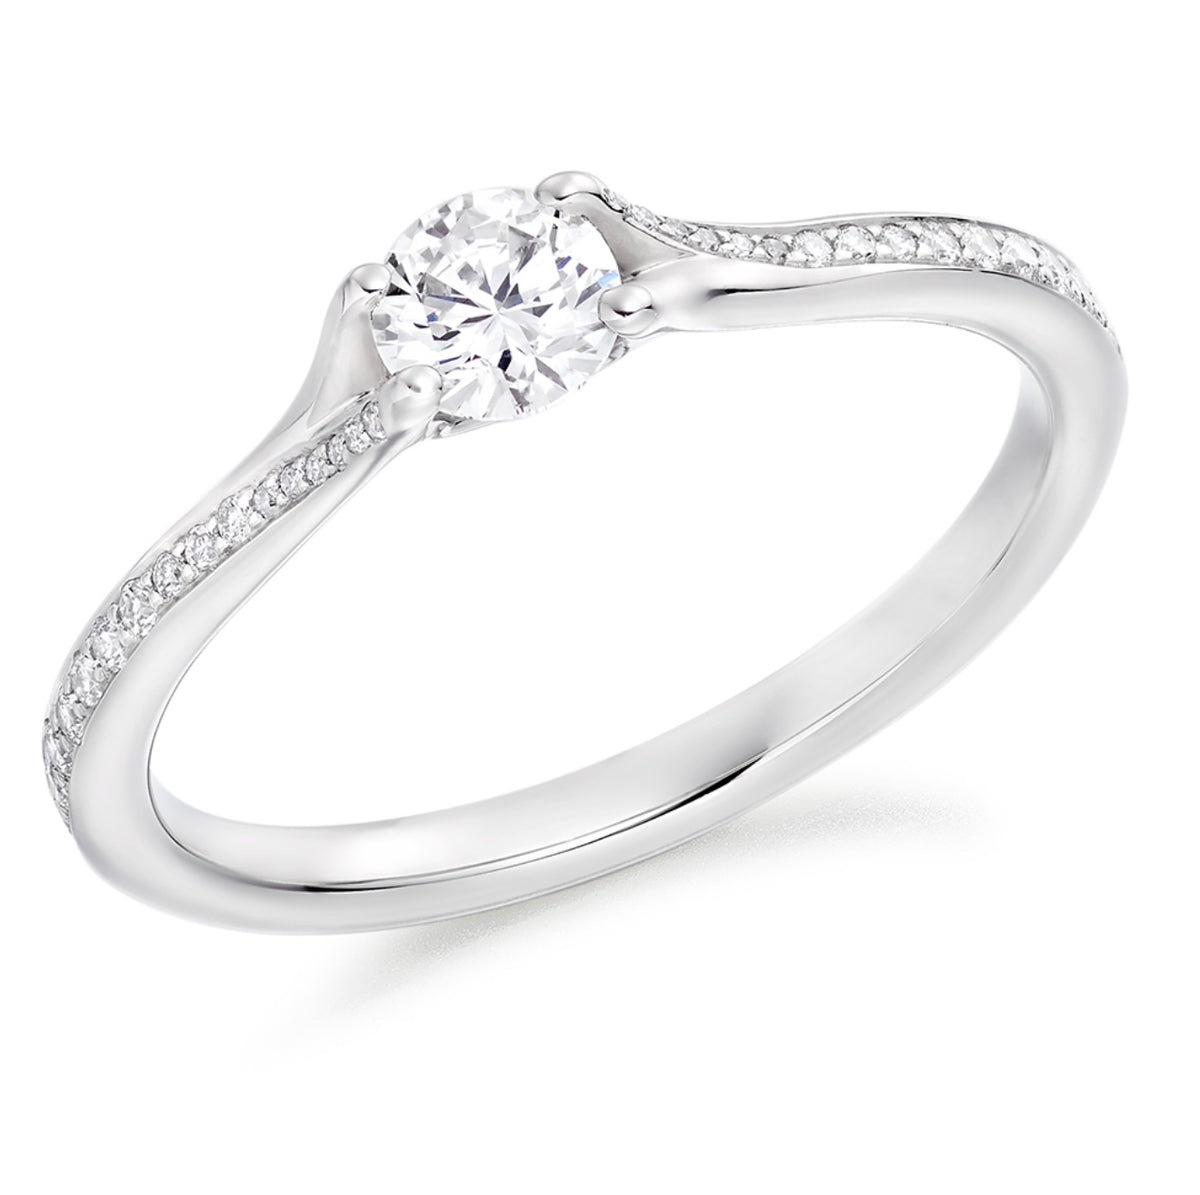 Platinum round brilliant open gallery solitaire ring with diamond shoulders